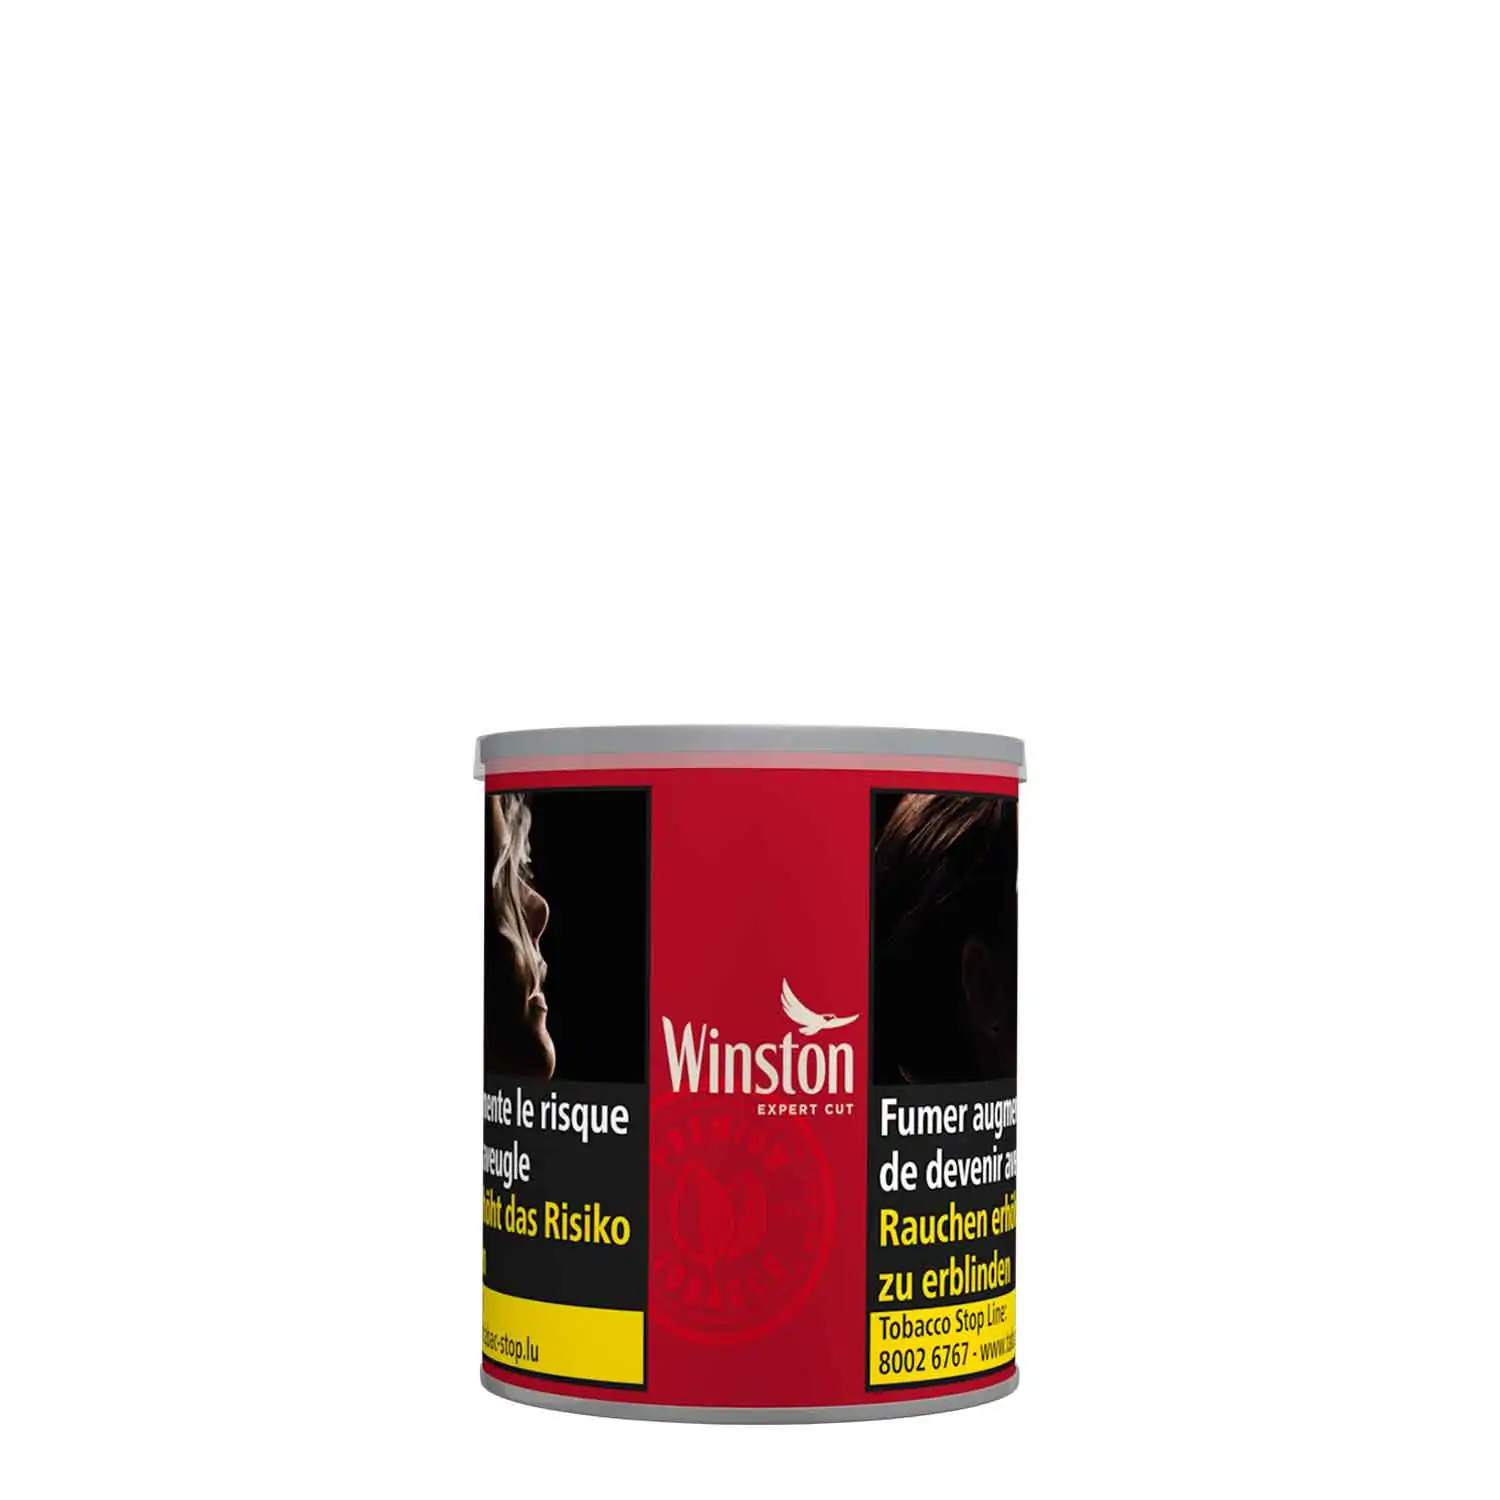 Winston expert rouge 170g - Buy at Real Tobacco